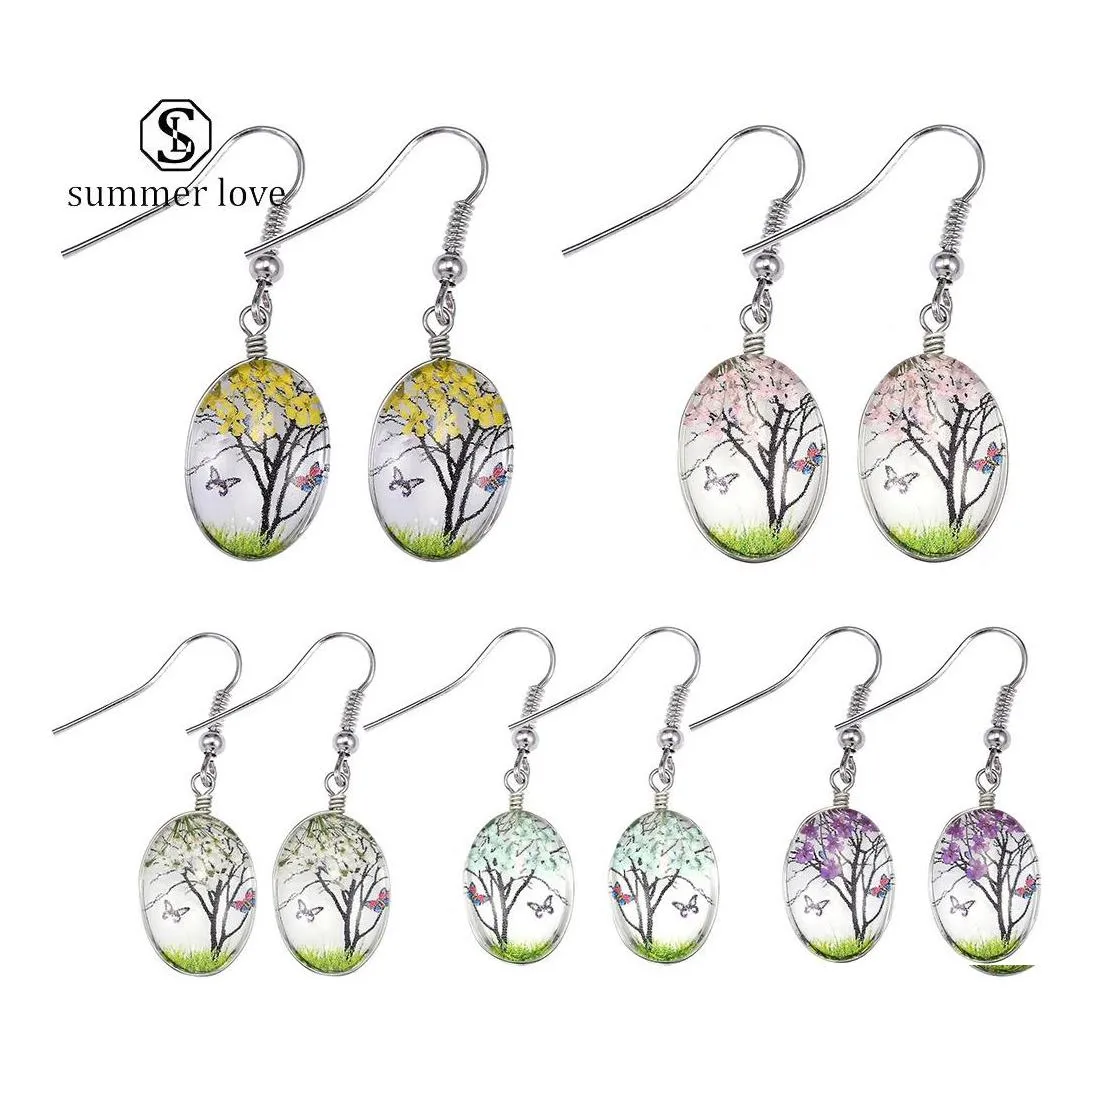 Dangle Chandelier Mticolored Natural Dried Flowers Earrings Glass Oval Ball Tree Of Life Drop Earing Creative Pendent Jewelry Gift Dh8Kt